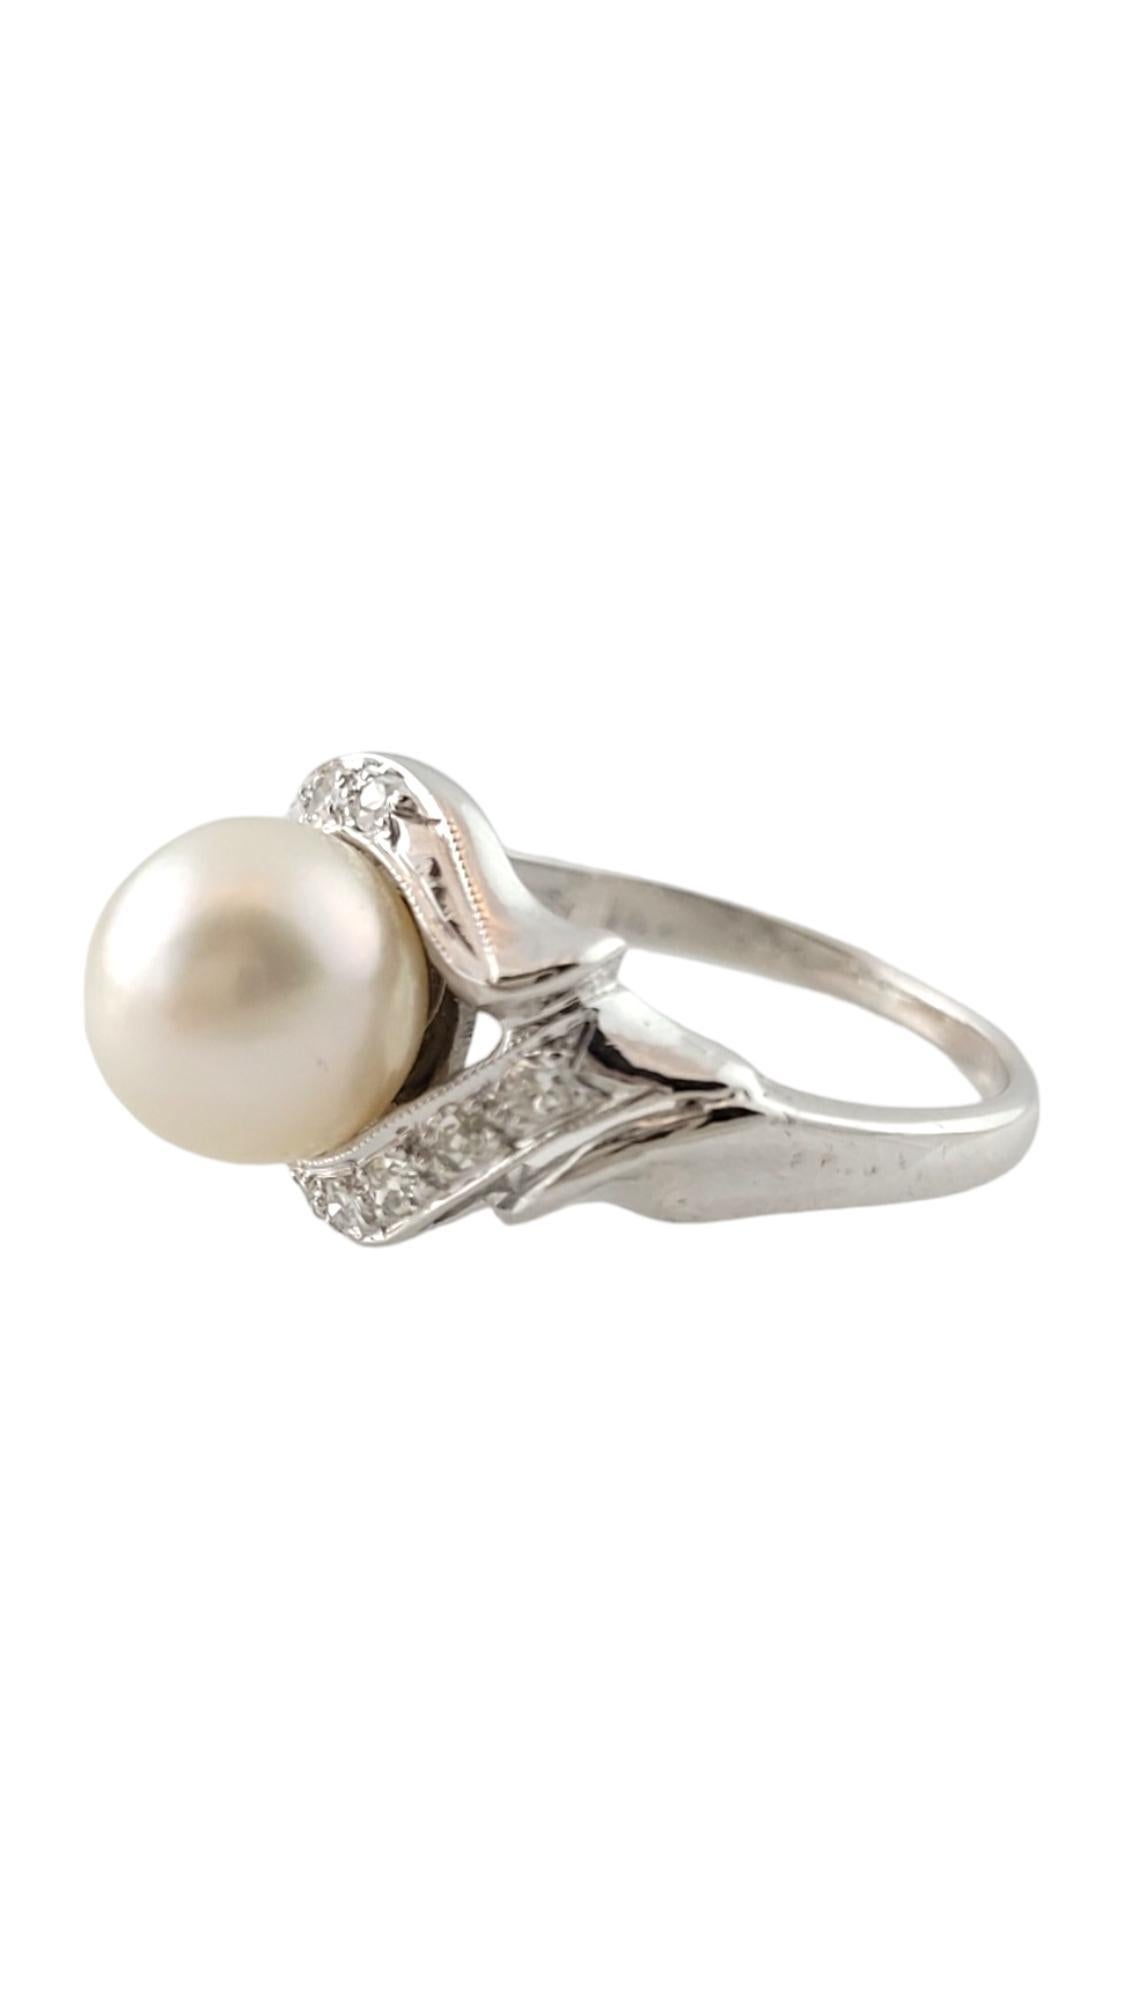 Vintage 14K White Gold Diamond and Pearl Ring Size 5.25

This beautiful 14K white gold ring features a gorgeous white pearl and 10 old single cut diamonds for a stunning look!

Pearl: 7.84mm

Approximate total diamond weight: .10 cts

Diamond color: